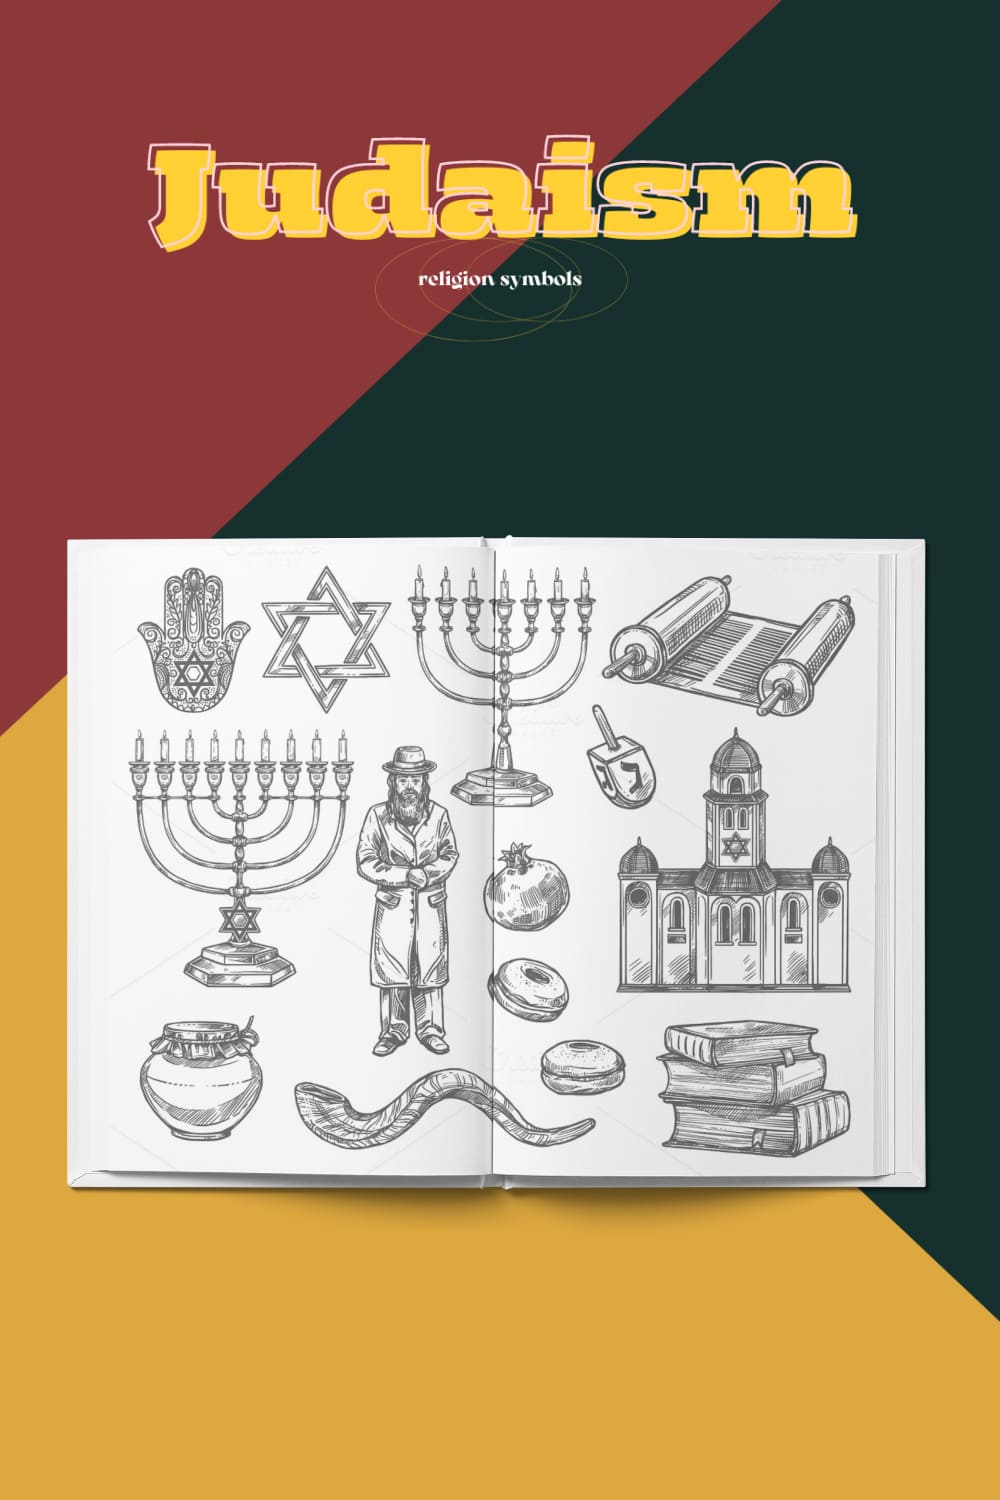 Images of the shrines of Judaism.